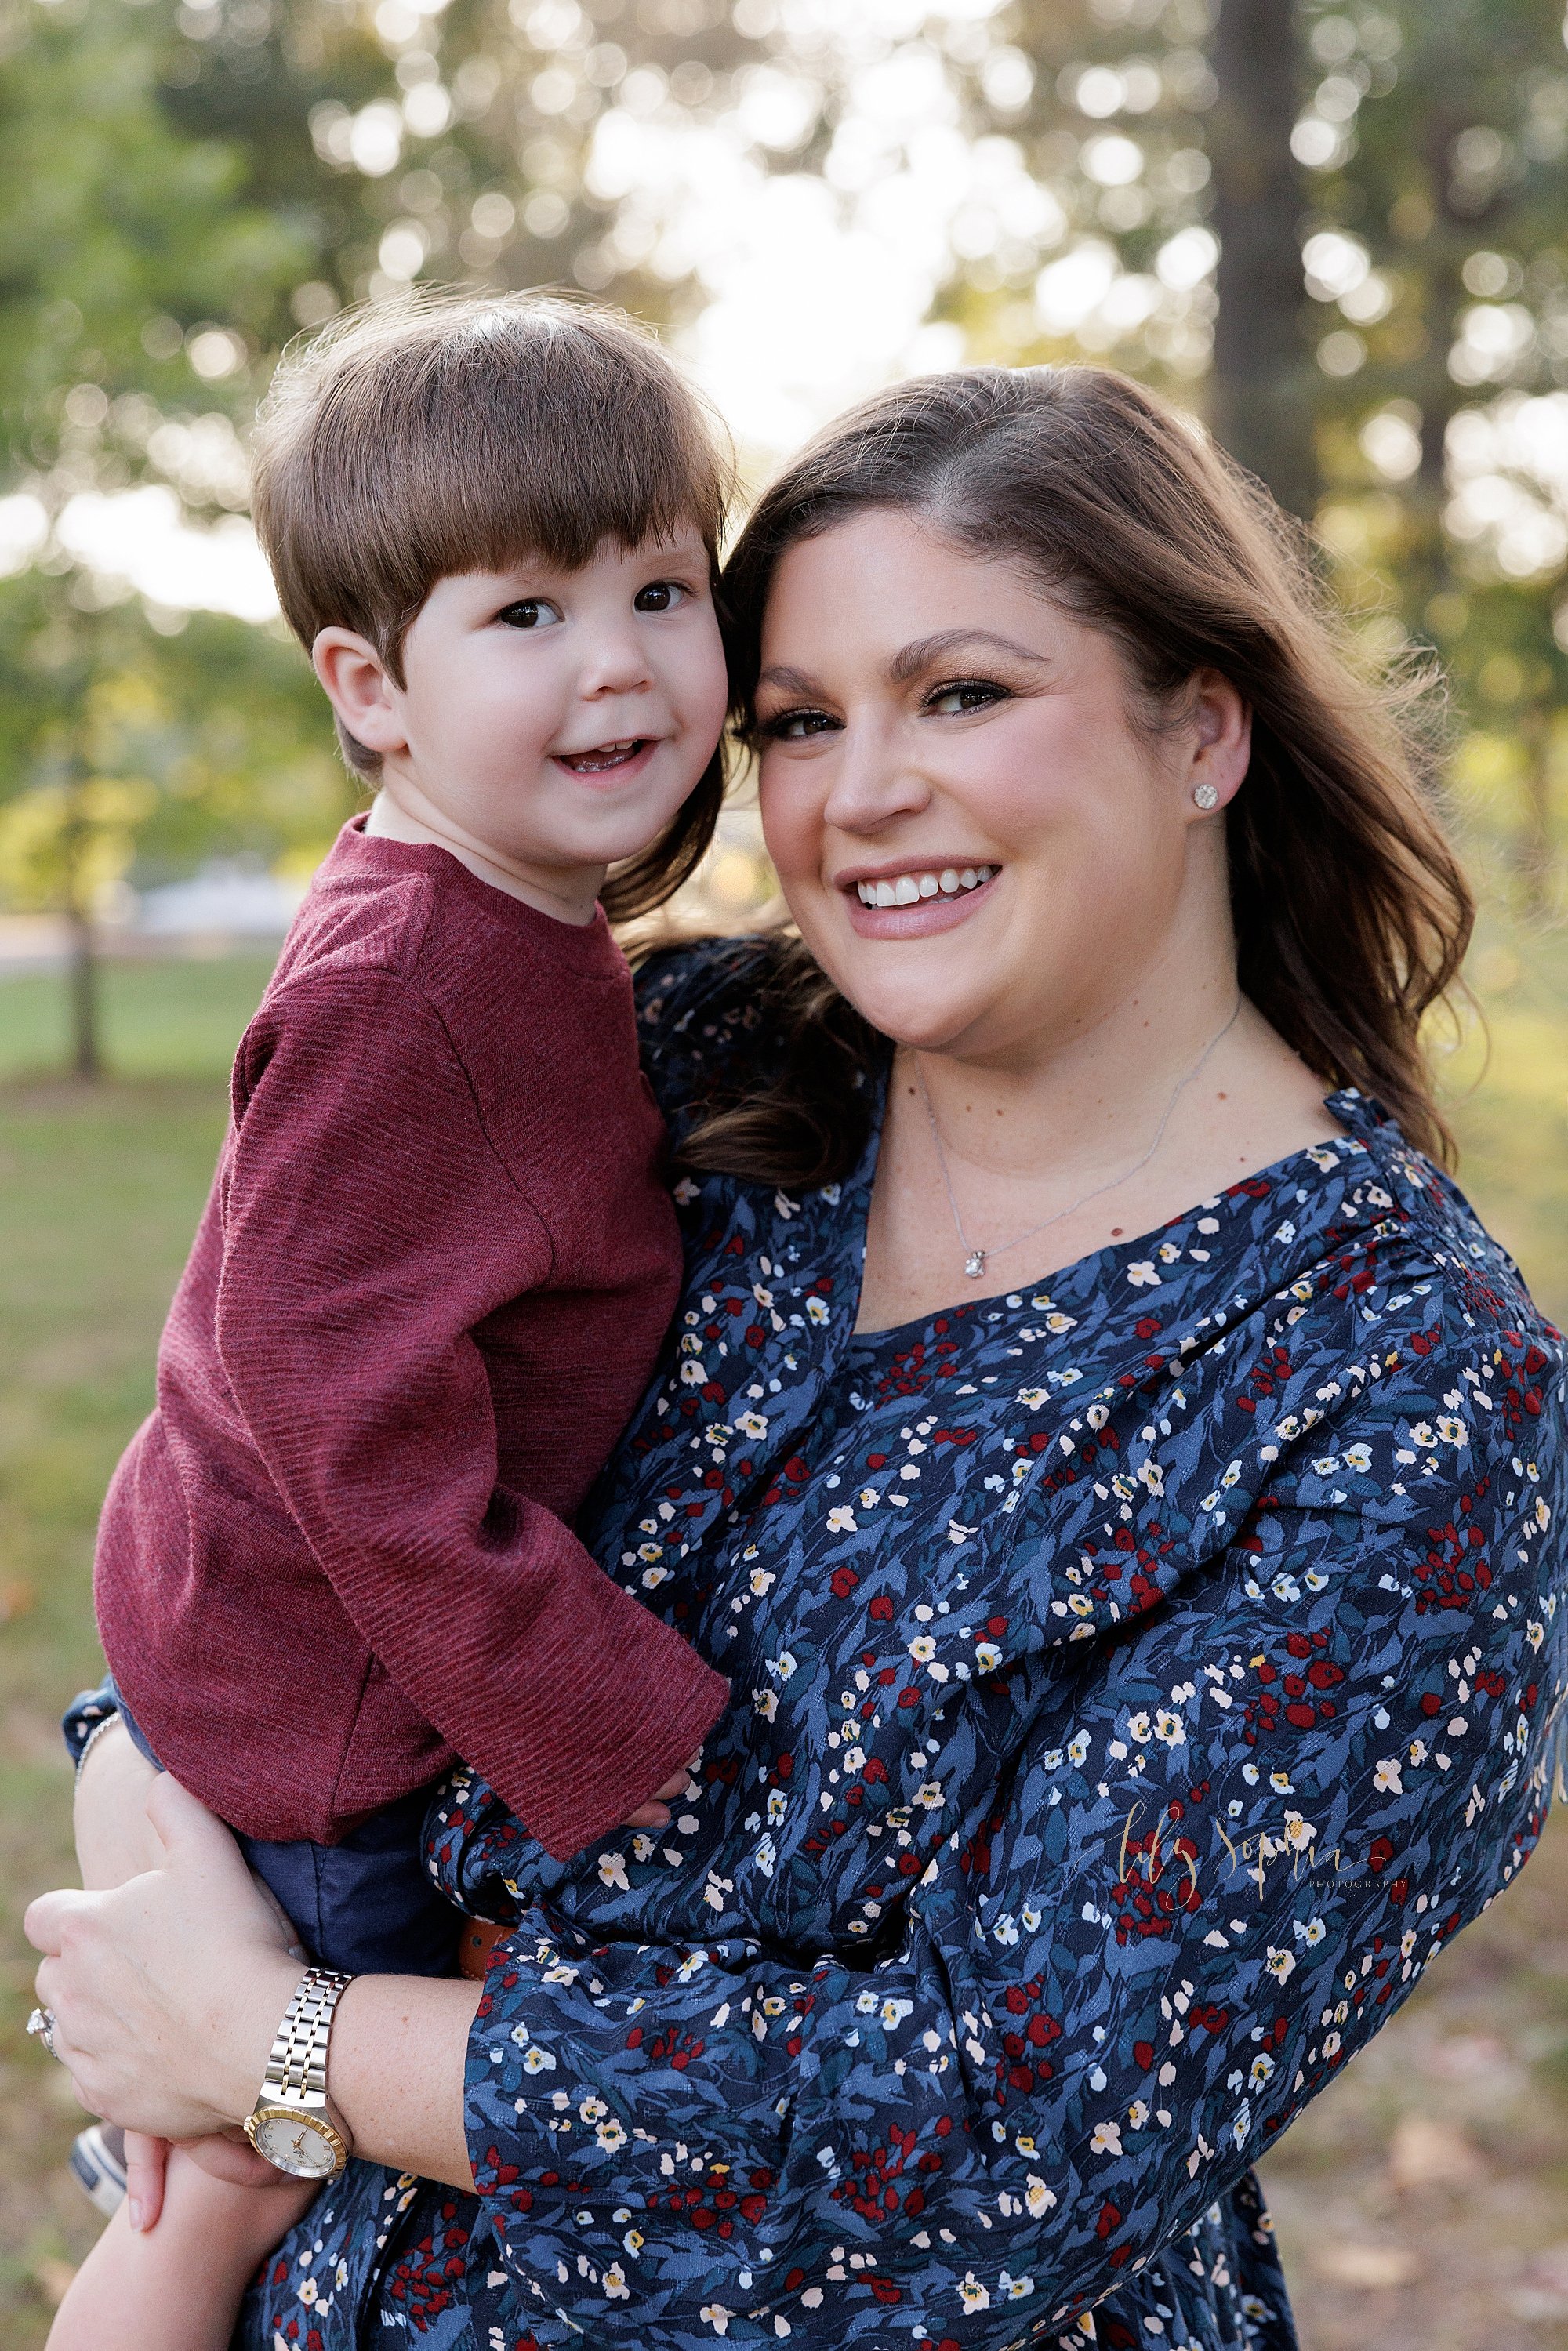 intown-atlanta-decatur-brookhaven-buckhead-outdoor-fall-pictures-family-photoshoot_5524.jpg